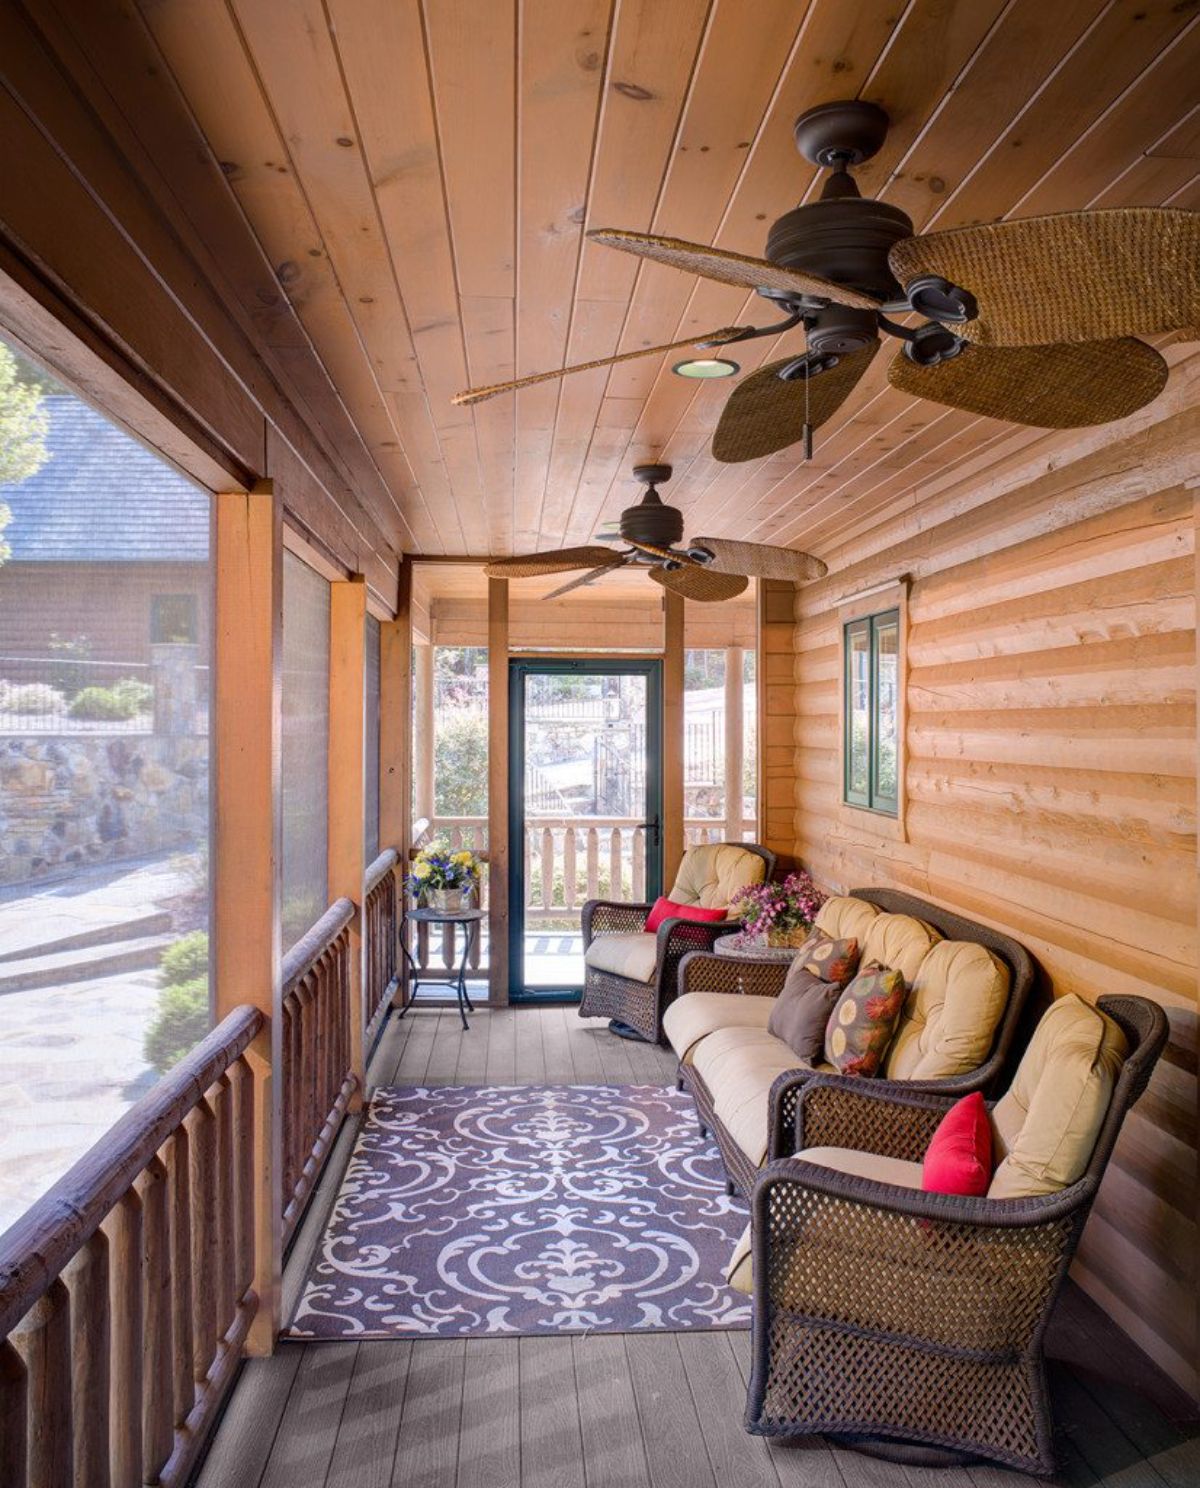 wicker chairs against wall in covered screen porch off log cabin